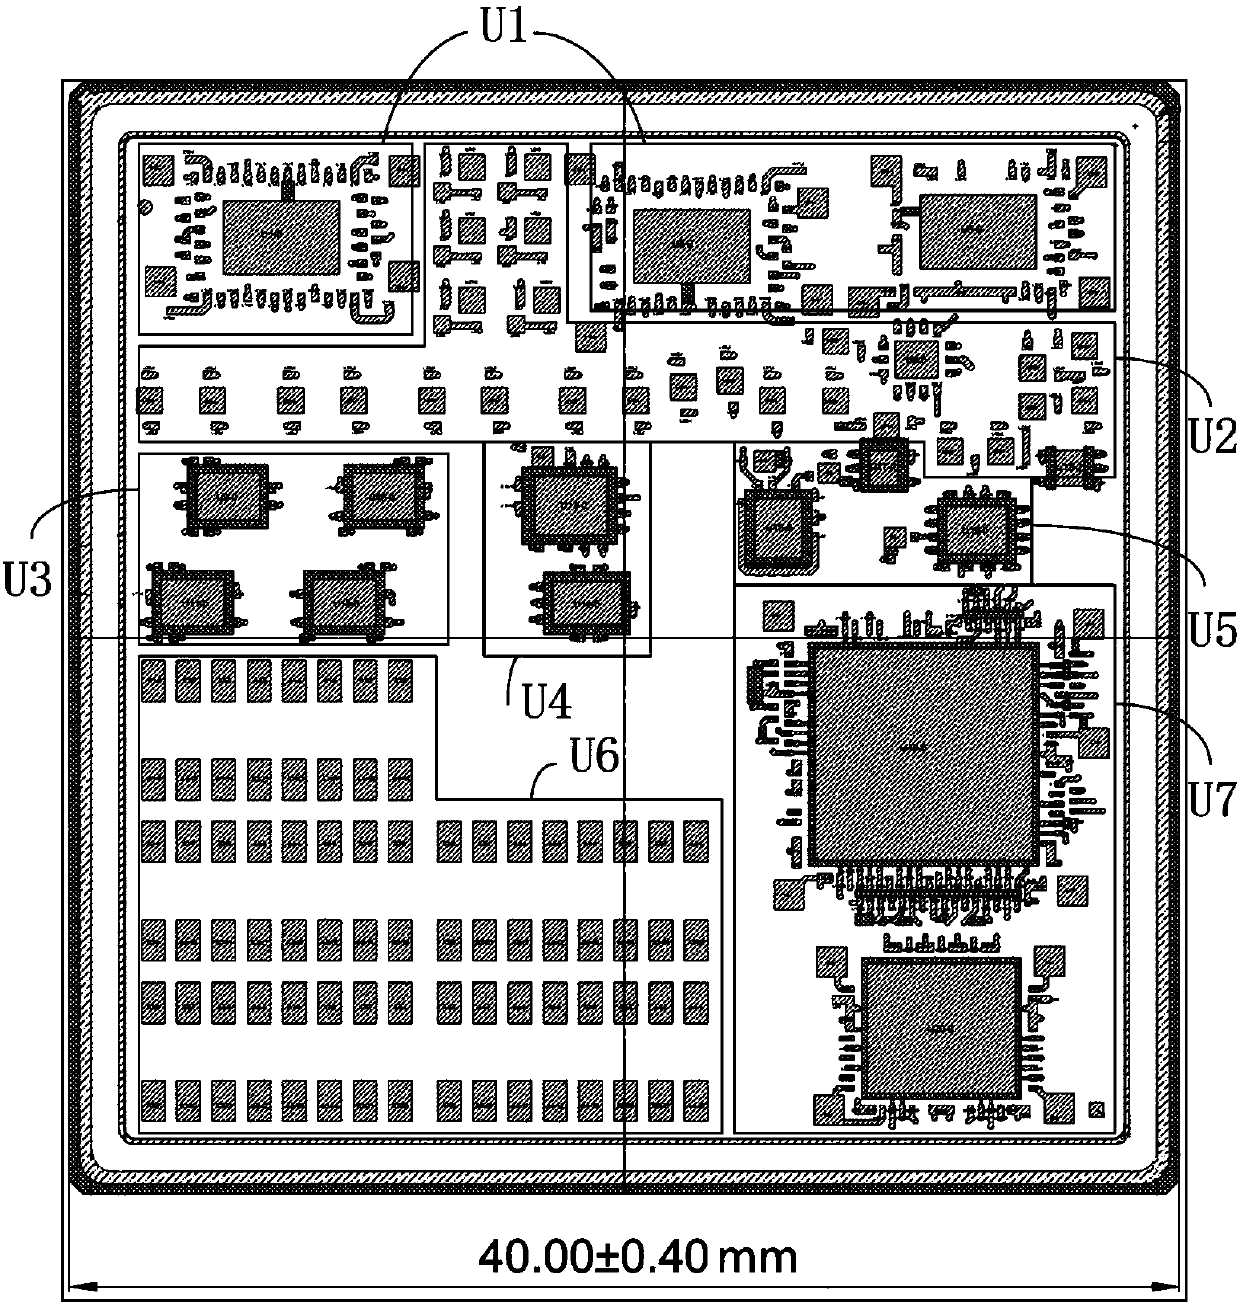 Integrated-packaging-based multifunctional interface circuit